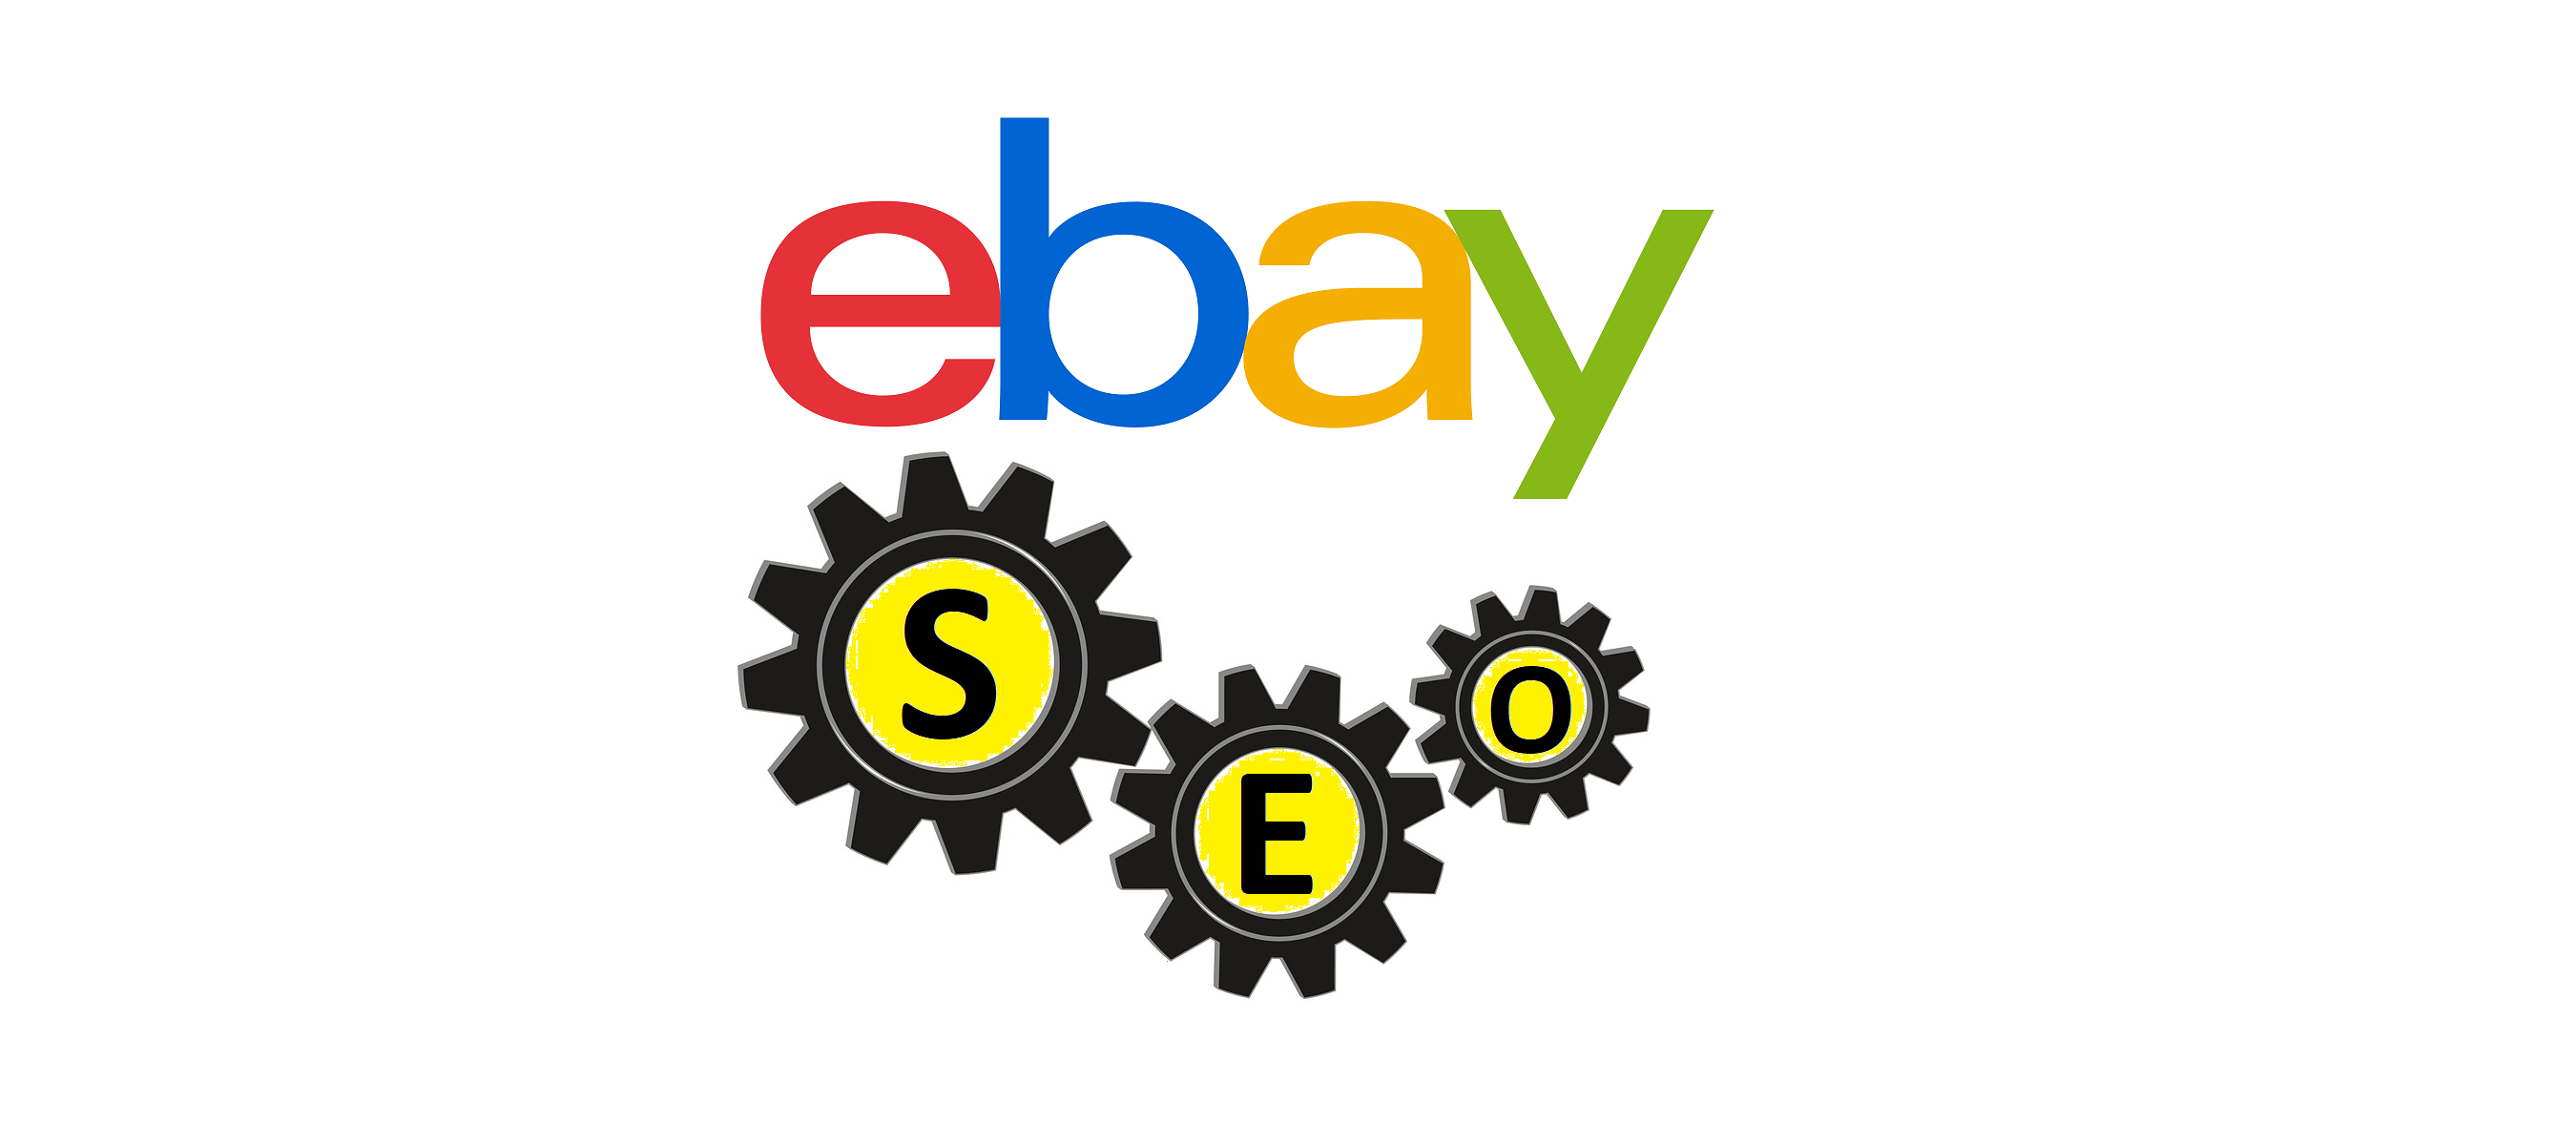 Why is a custom eBay template so important?